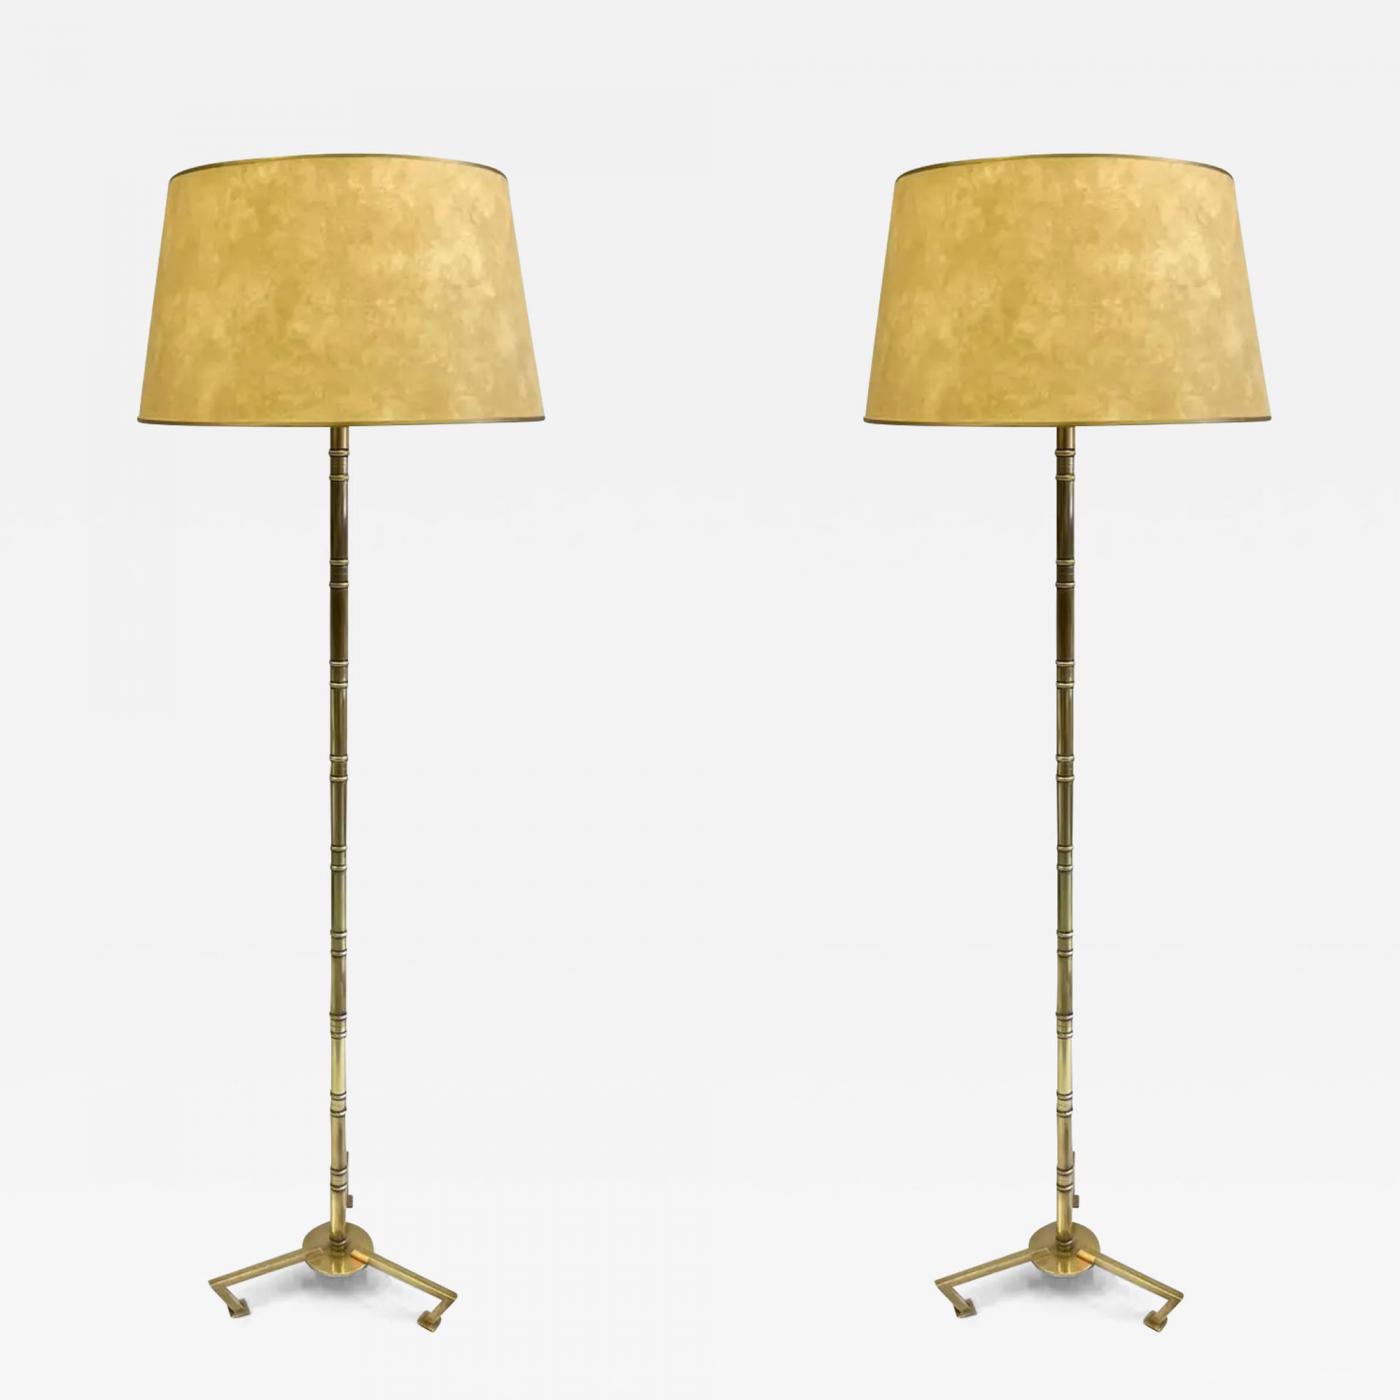 https://cdn.incollect.com/sites/default/files/zoom/-Maison-Bagu-s-Pair-French-Modern-Neoclassical-Brass-Faux-Bamboo-Floor-Lamps-by-Maison-Bagues-666307-3251806.jpg